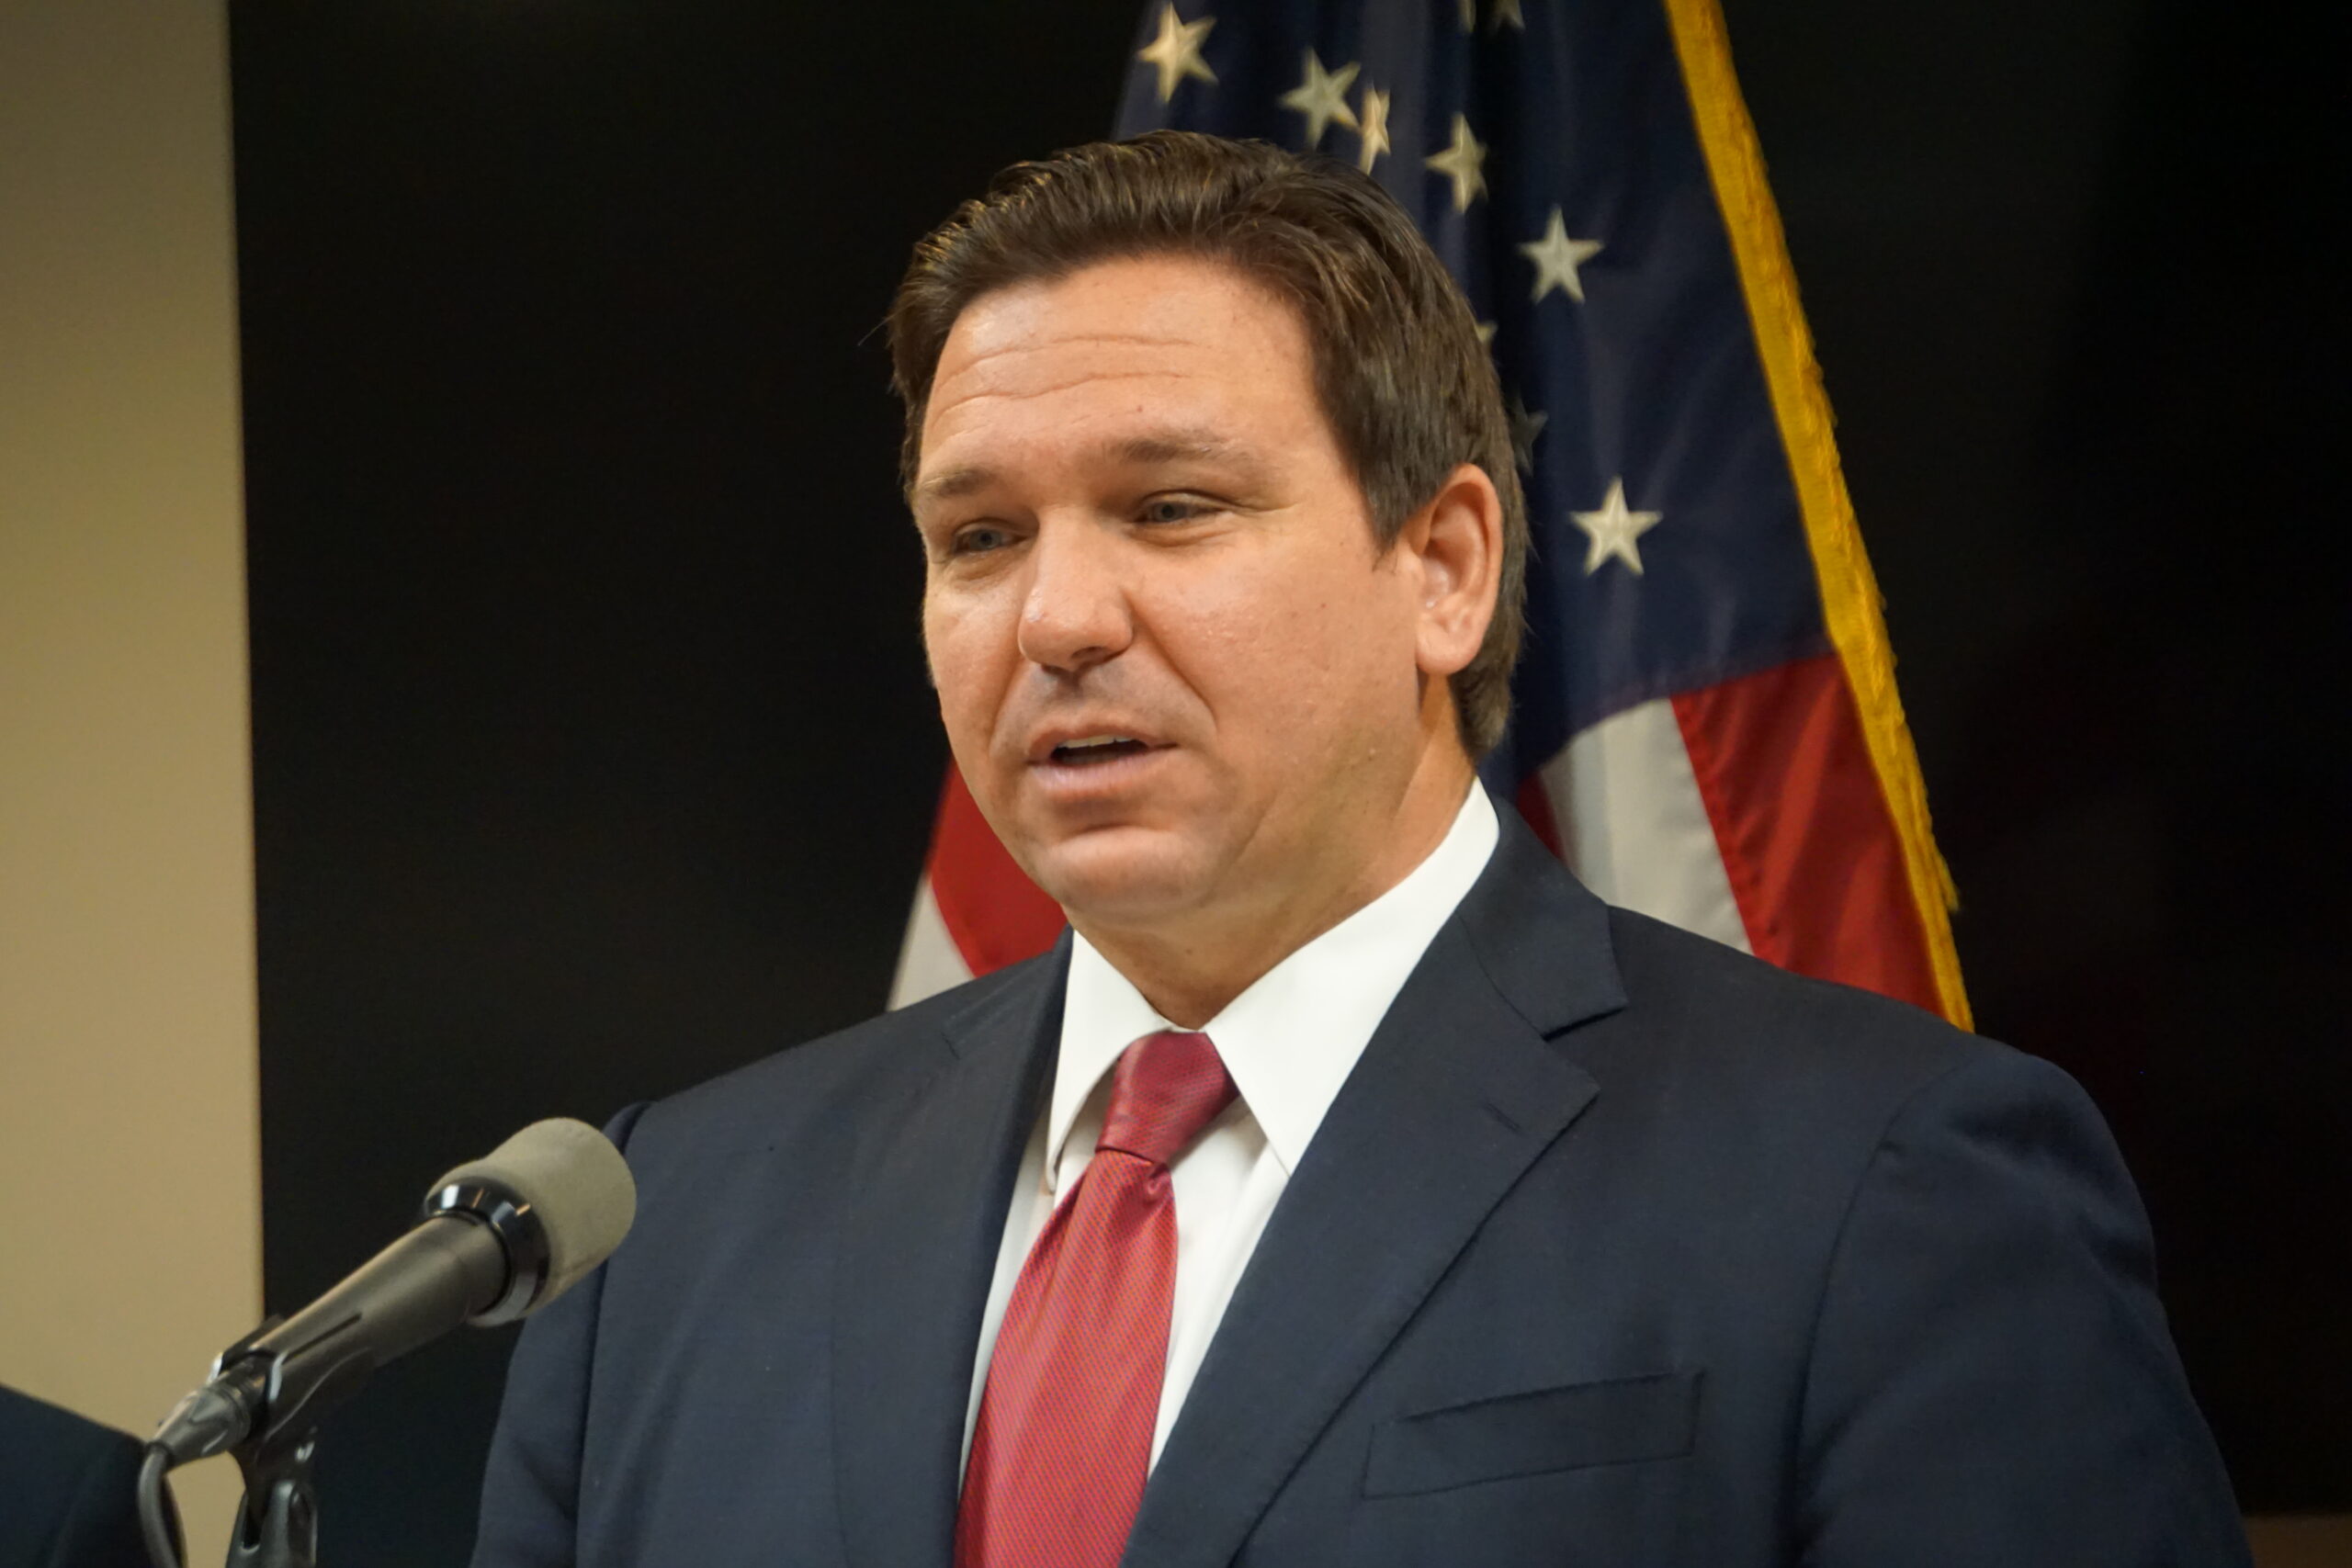 DeSantis: Biden's 'Trying to Impose More Restrictions'